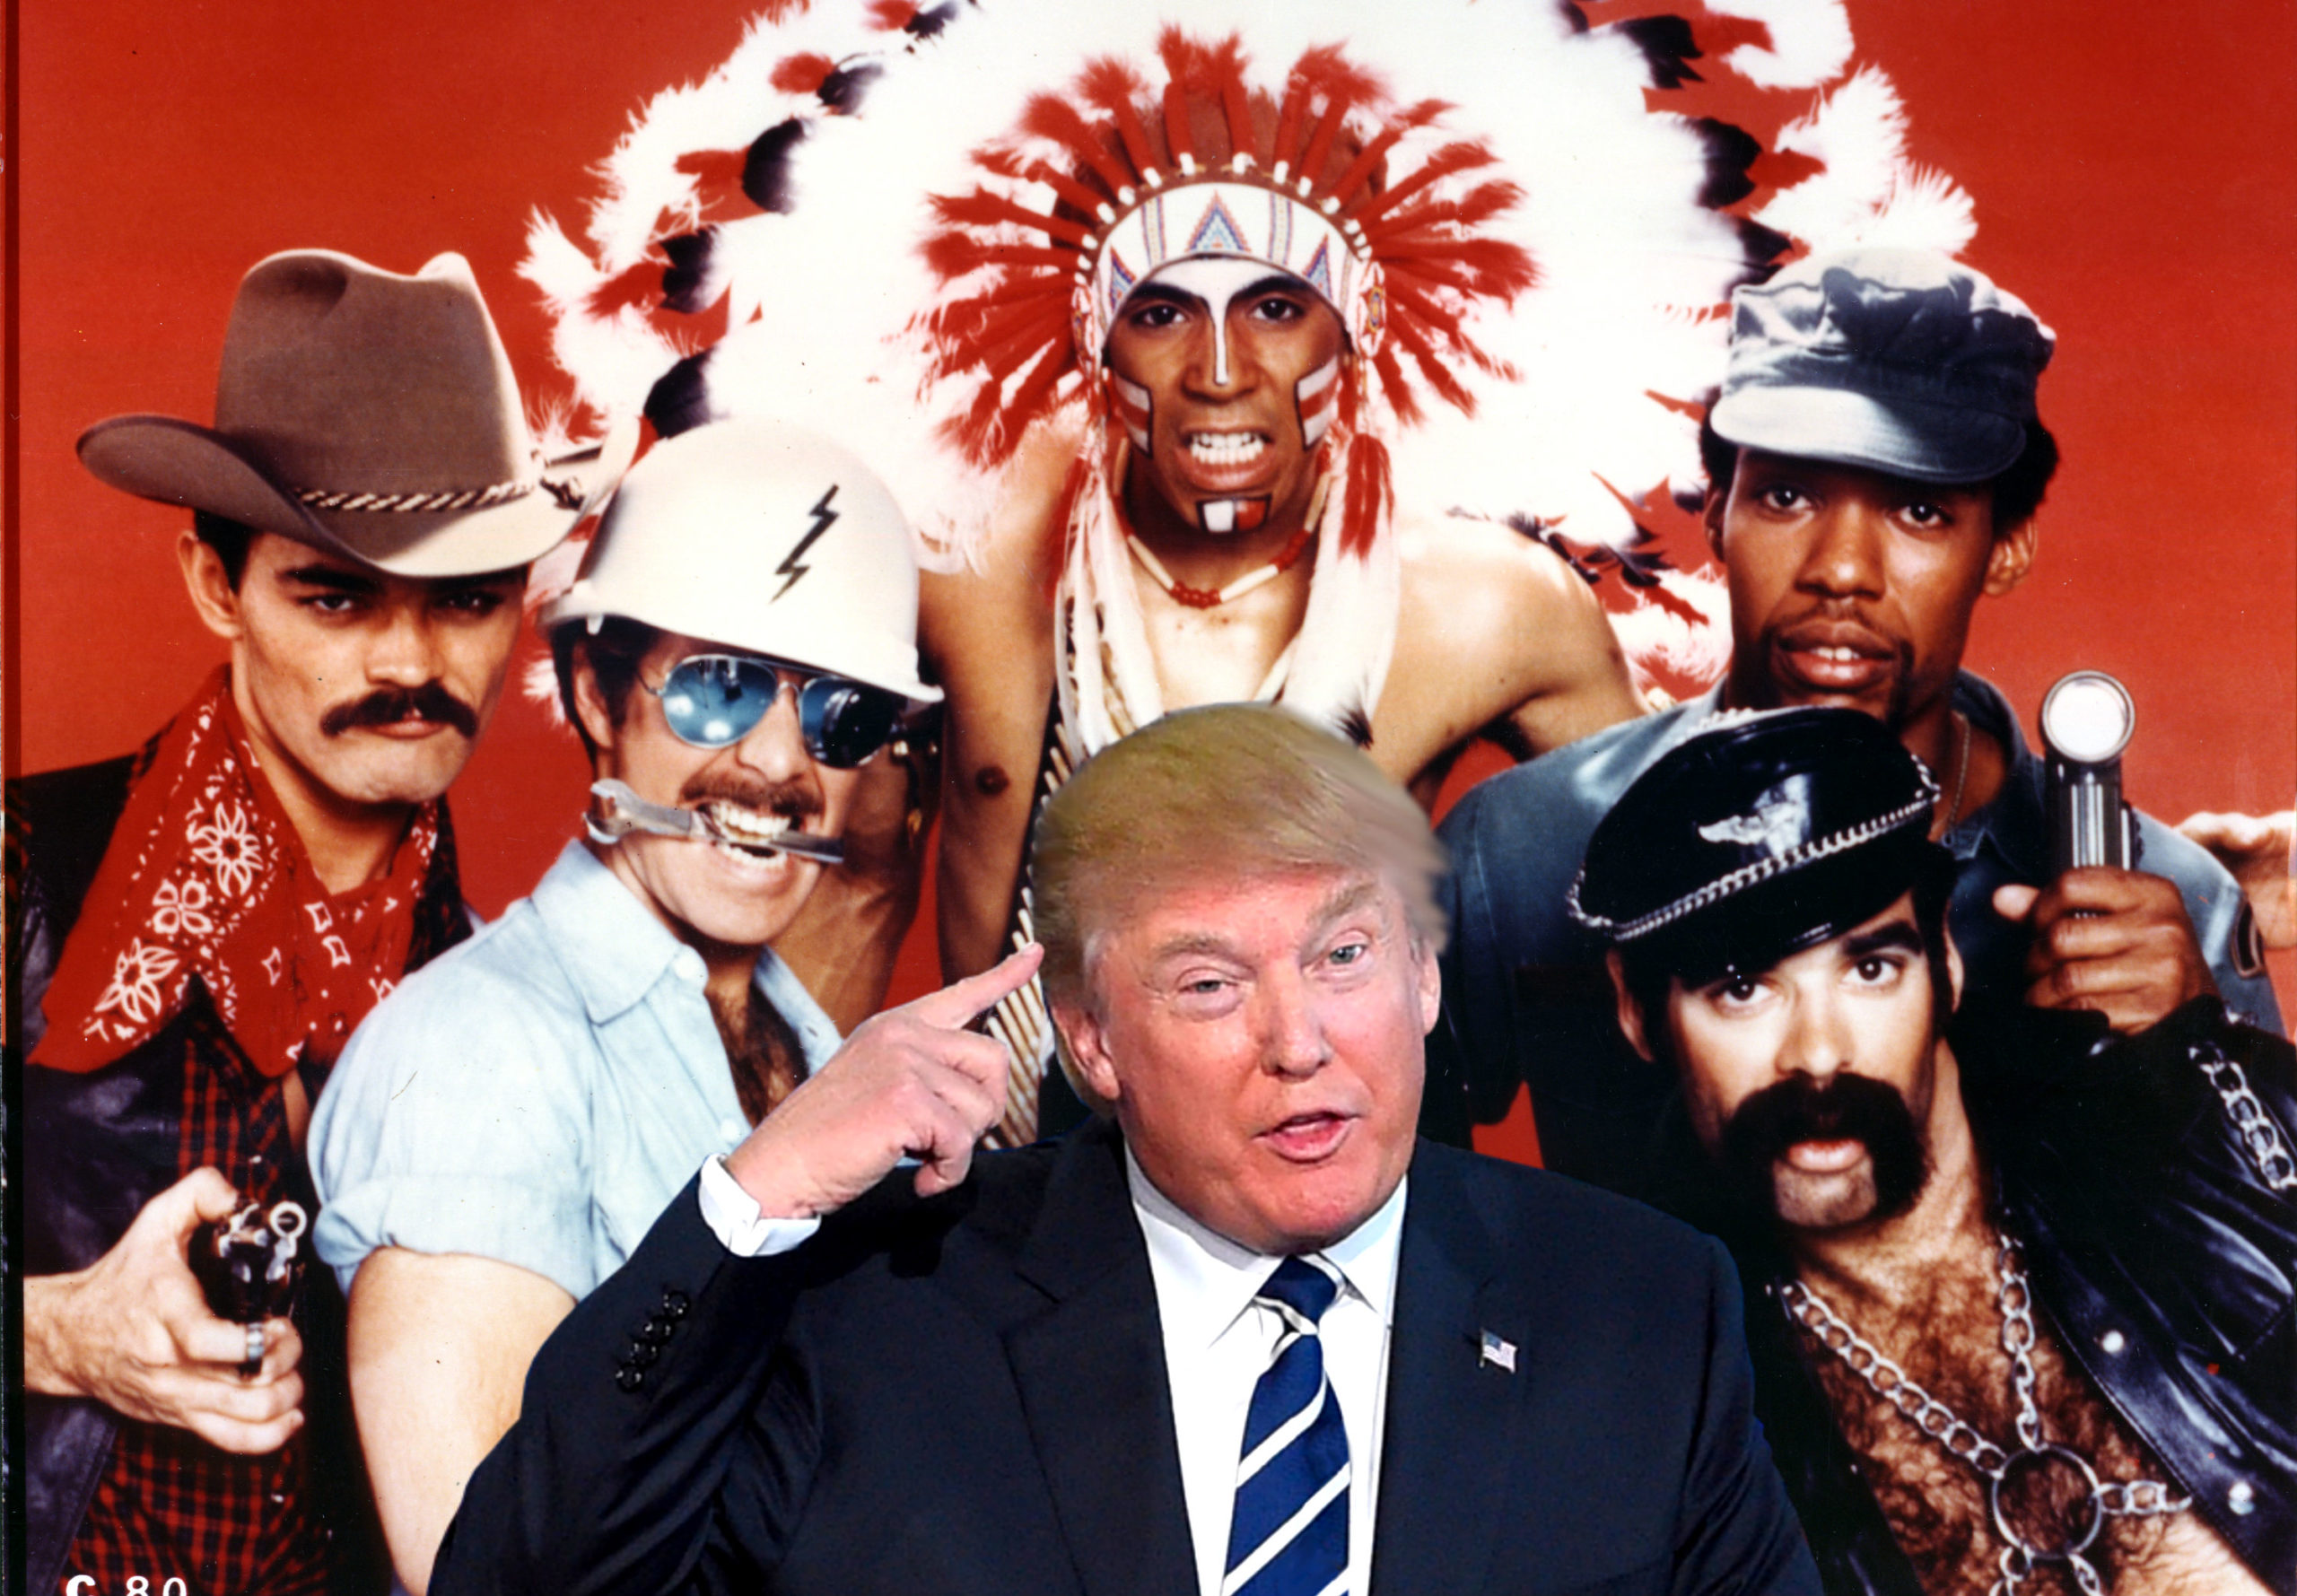 Village People tell Donald Trump to stop playing their music at rallies